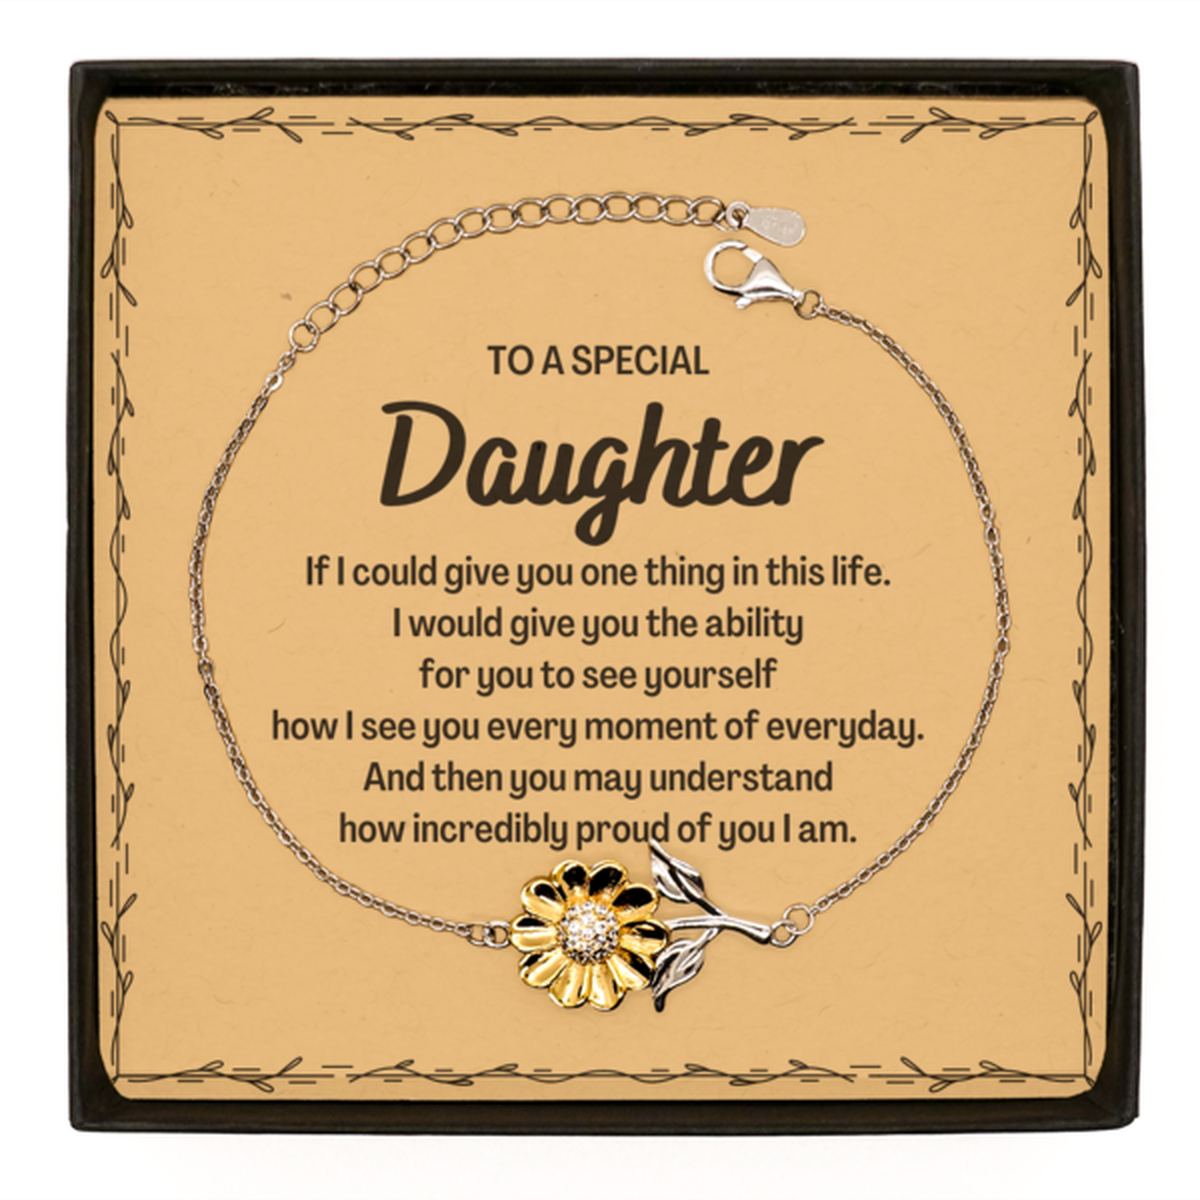 To My Daughter Sunflower Bracelet, Gifts For Daughter Message Card, Inspirational Gifts for Christmas Birthday, Epic Gifts for Daughter To A Special Daughter how incredibly proud of you I am